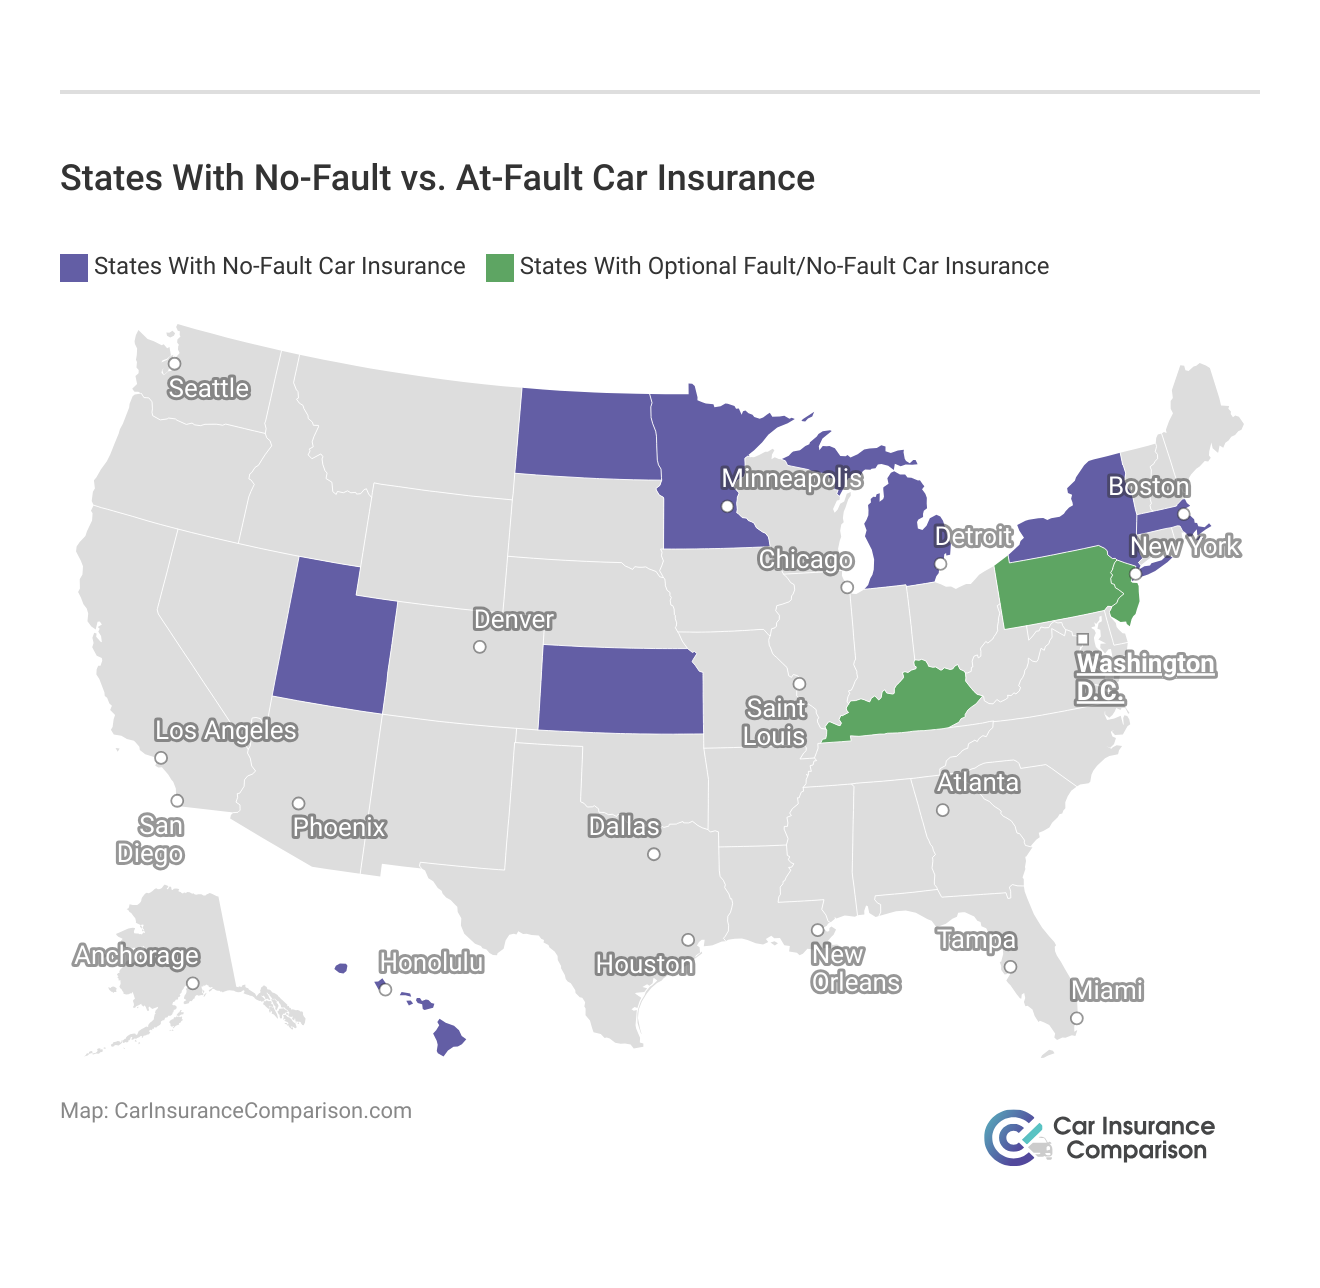 <h3>States With No-Fault vs. At-Fault Car Insurance</h3>